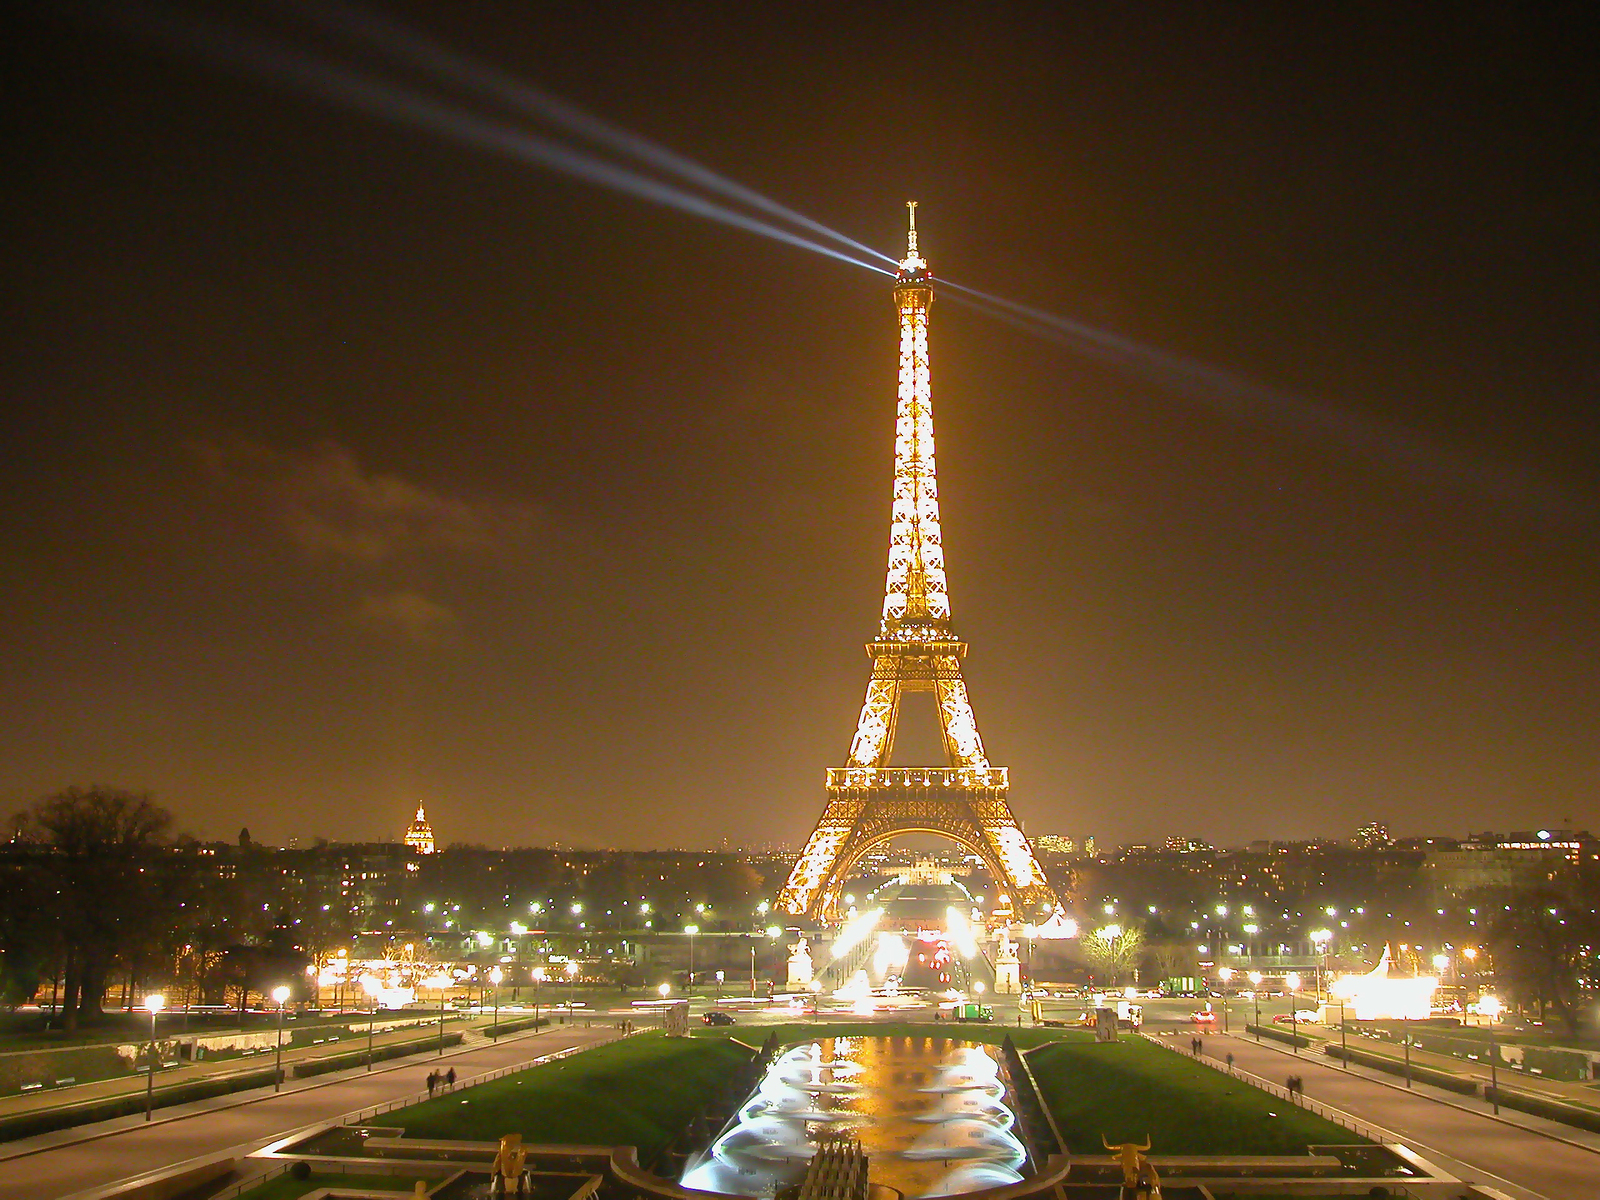 But that other guy....: 5 Trivia Questions about the Eiffel Tower